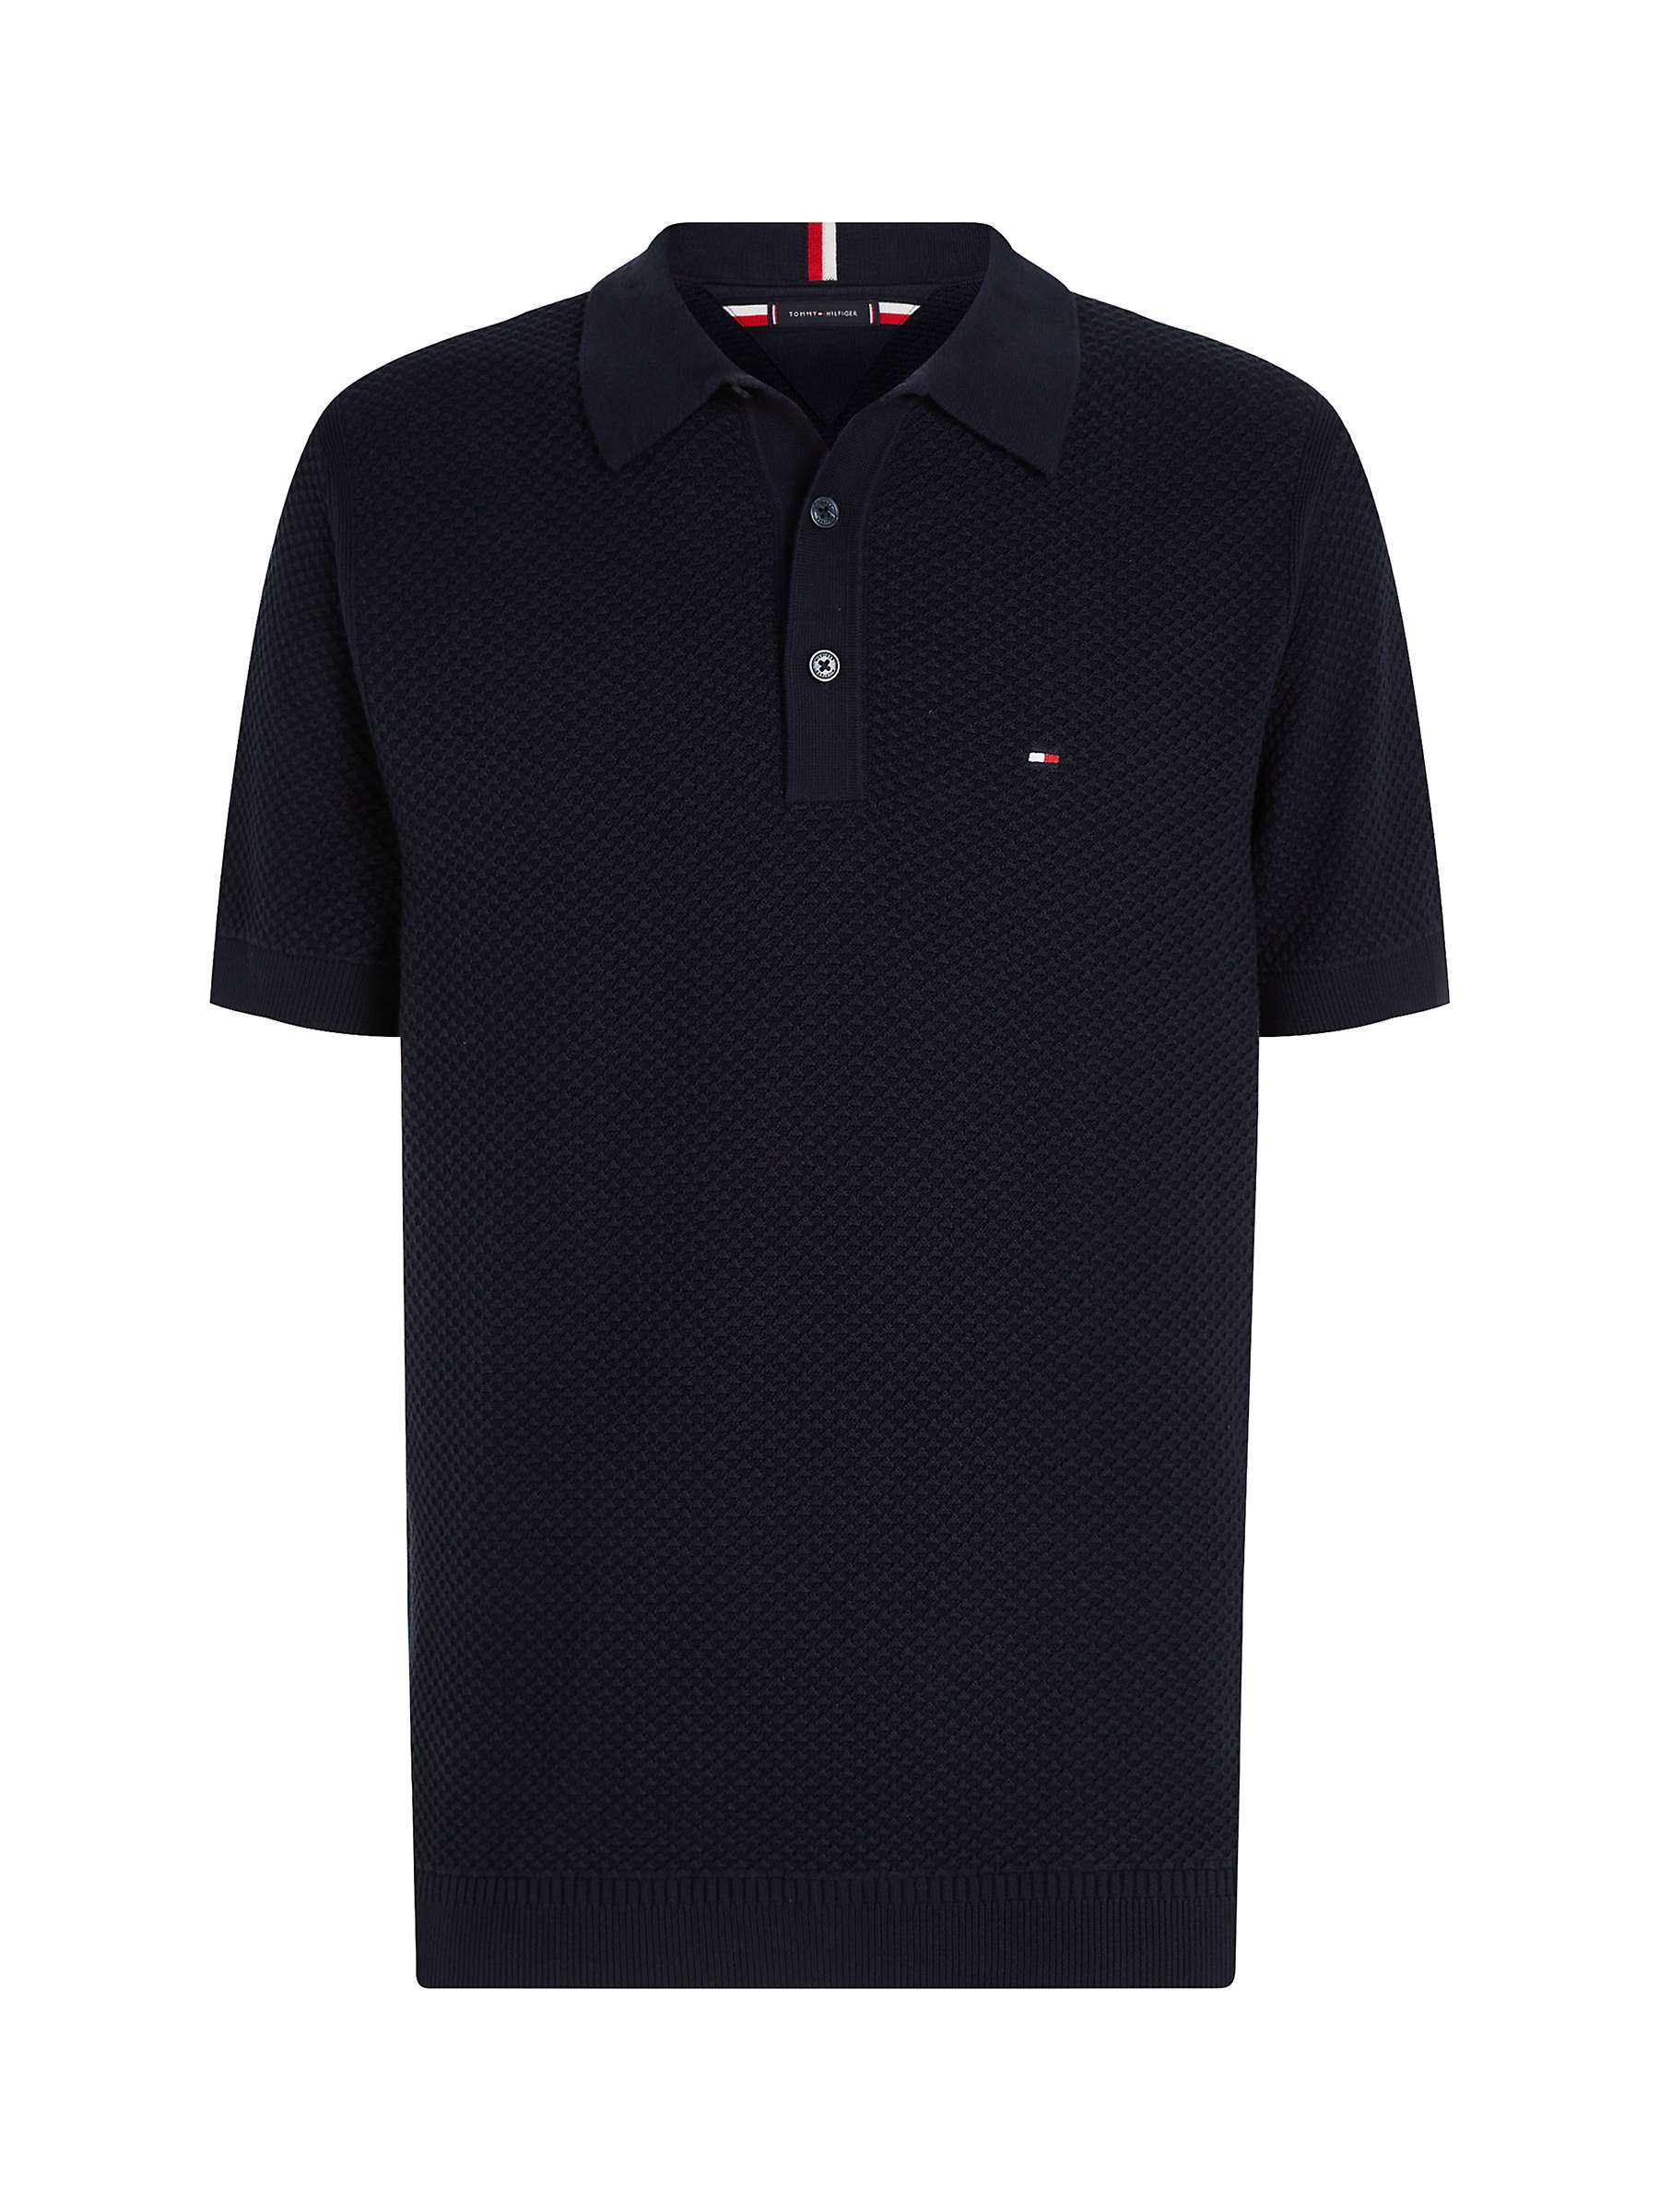 Buy Tommy Hilfiger Oval Structure Polo Shirt, Desert Sky Online at johnlewis.com